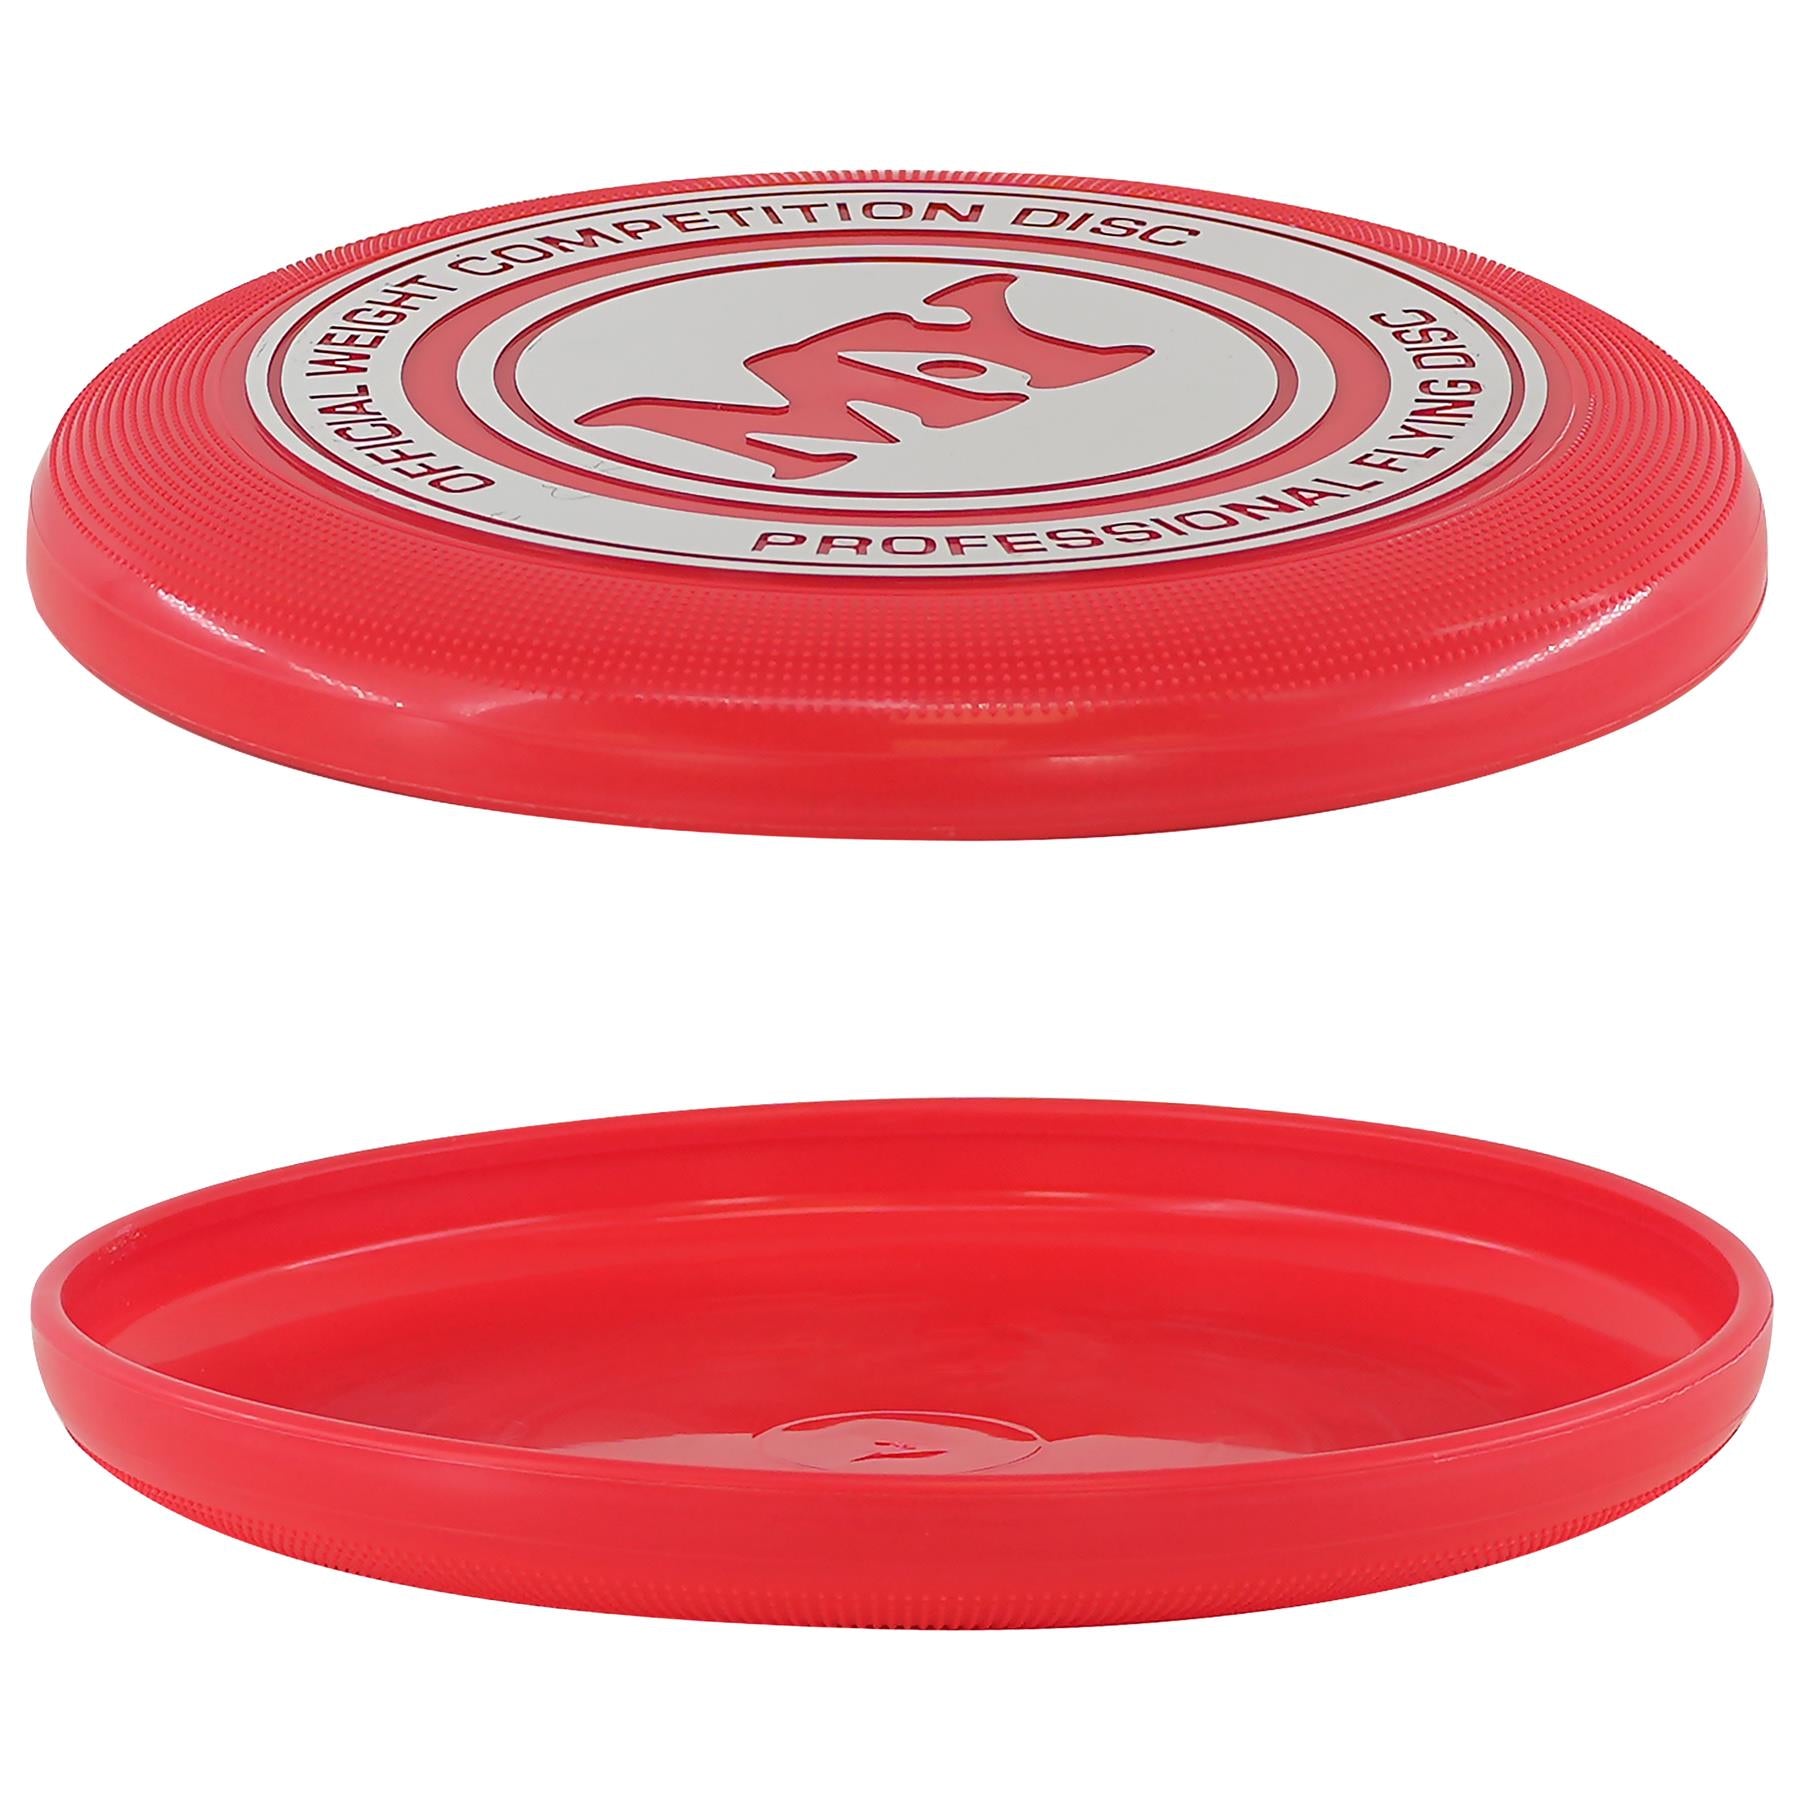 Professional Frisbee 4 Assorted Colours by The Magic Toy Shop - The Magic Toy Shop